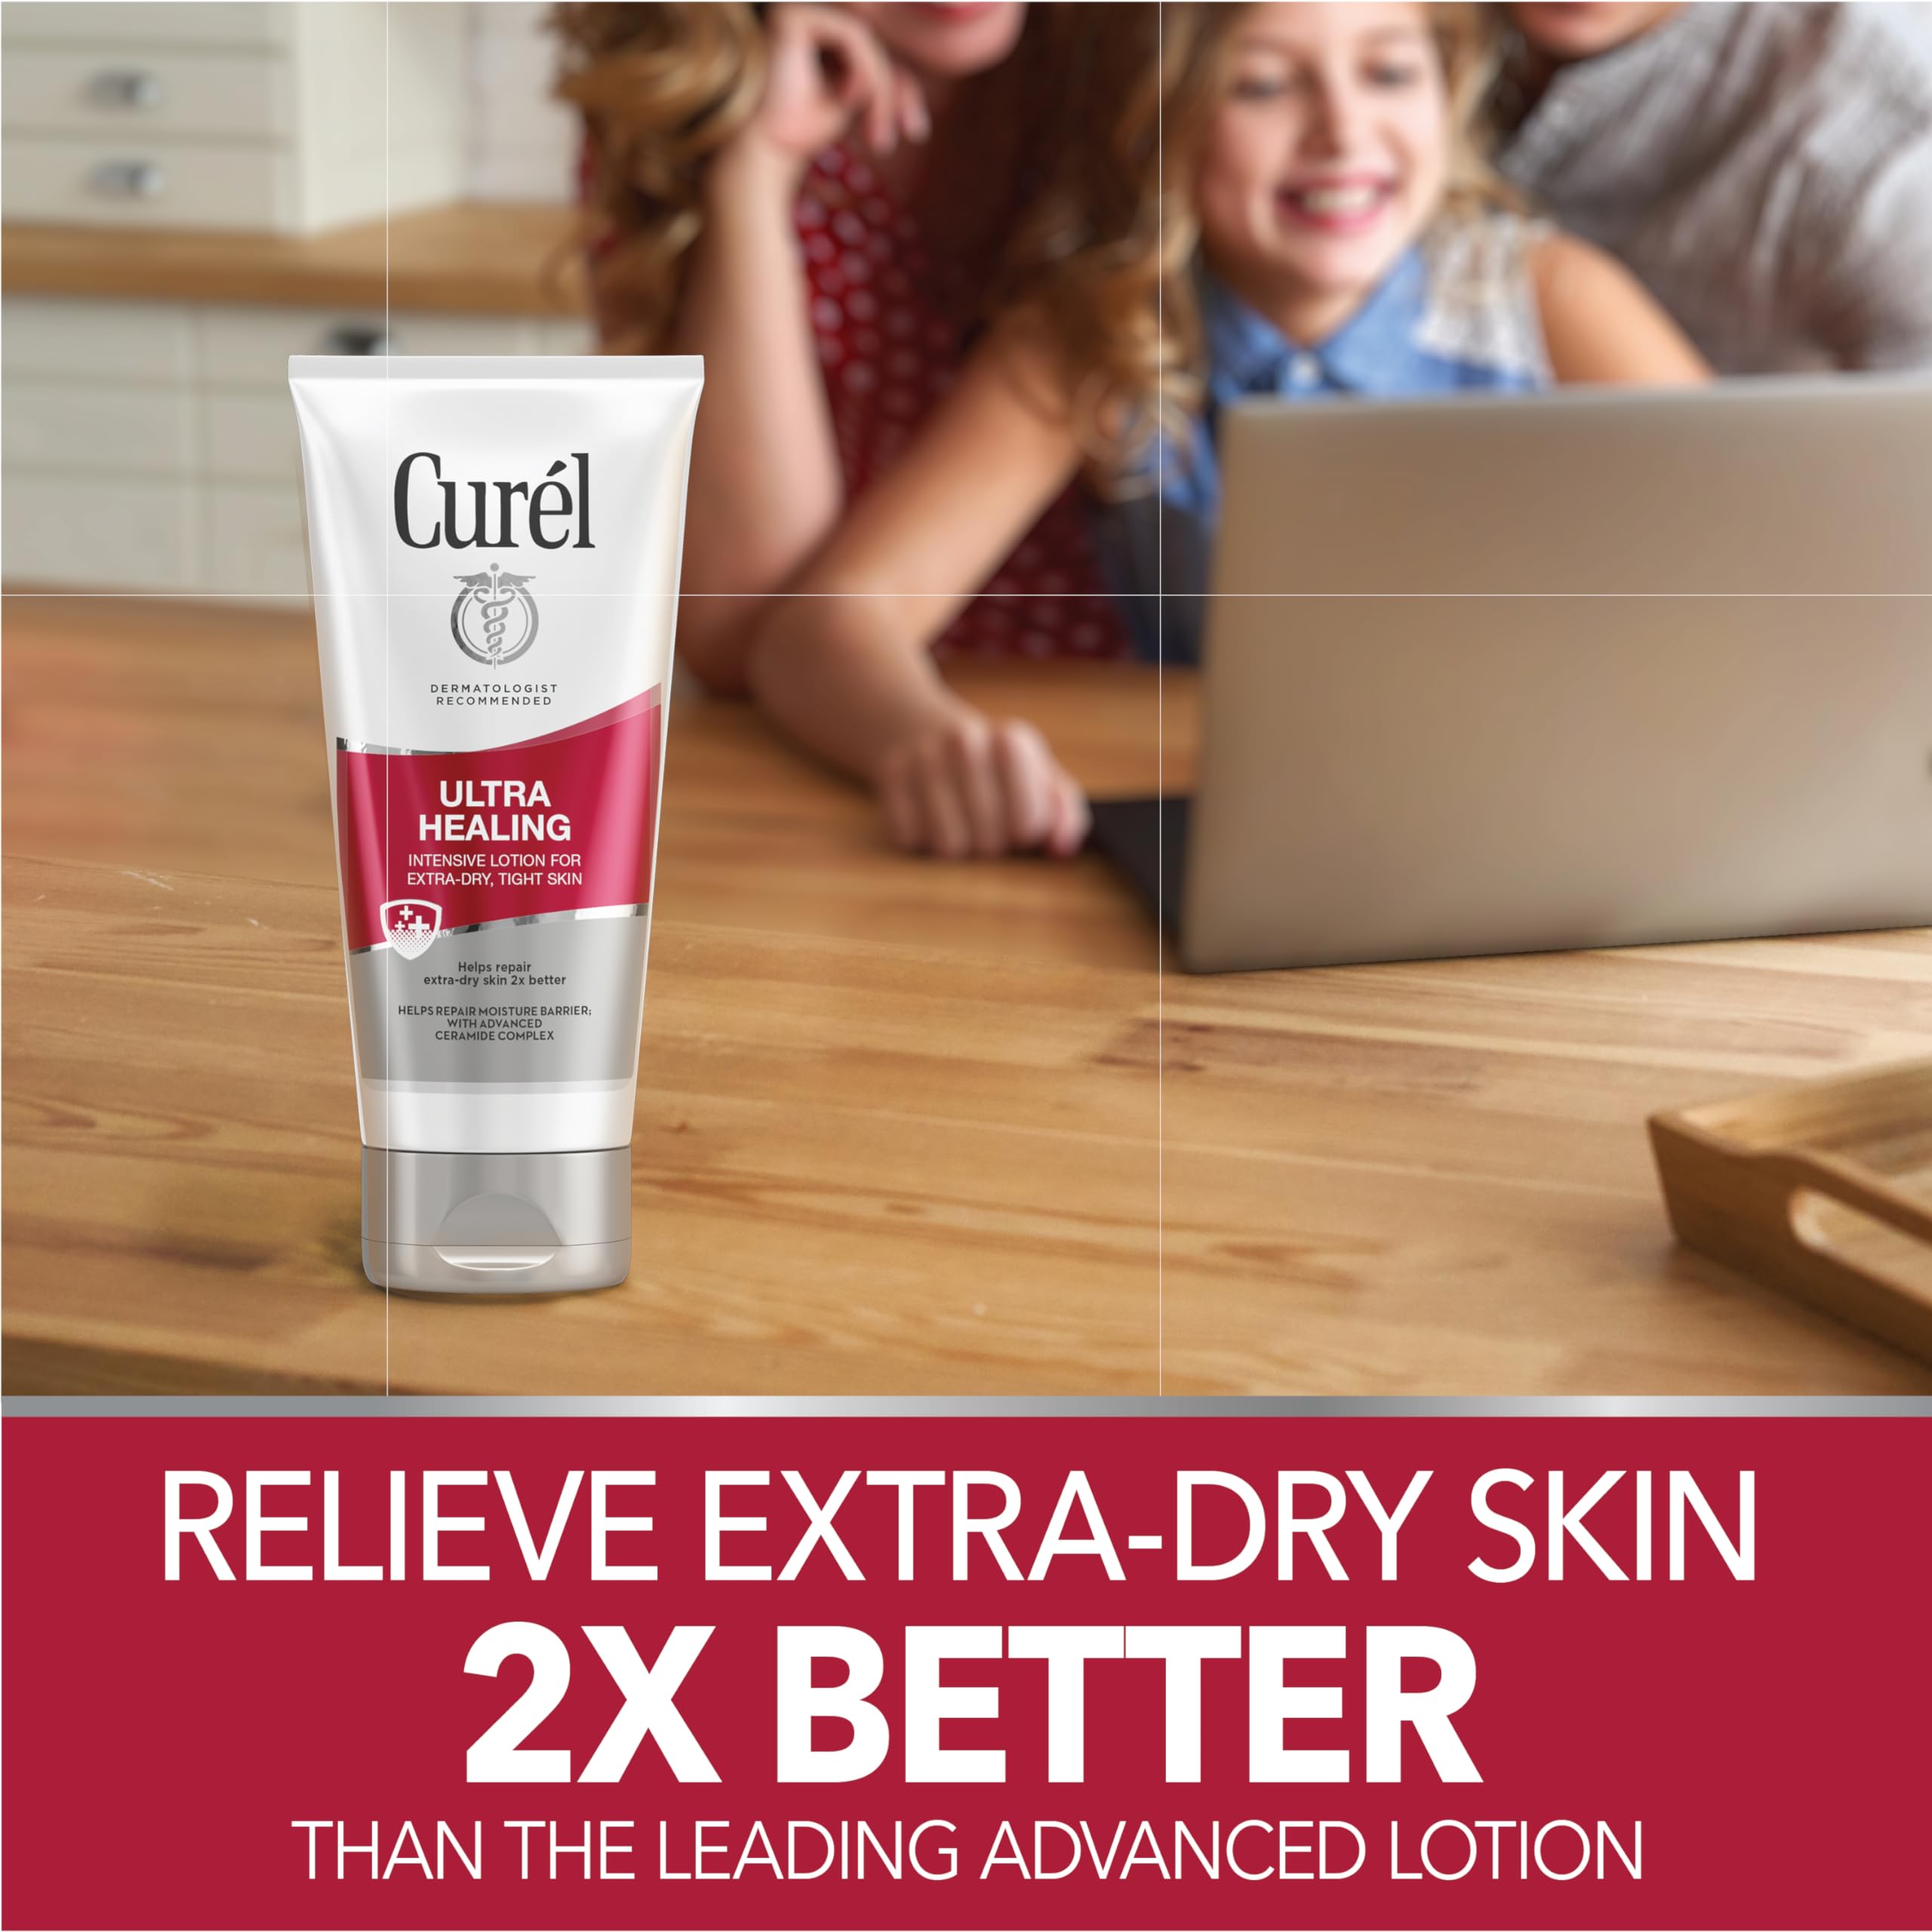 Curel Ultra Healing Intensive Fragrance-Free Lotion For Extra-Dry Skin, Dermatologist Recommended, Ideal for Sensitive Skin, Cruelty Free, Paraben Free, 3-6 Oz